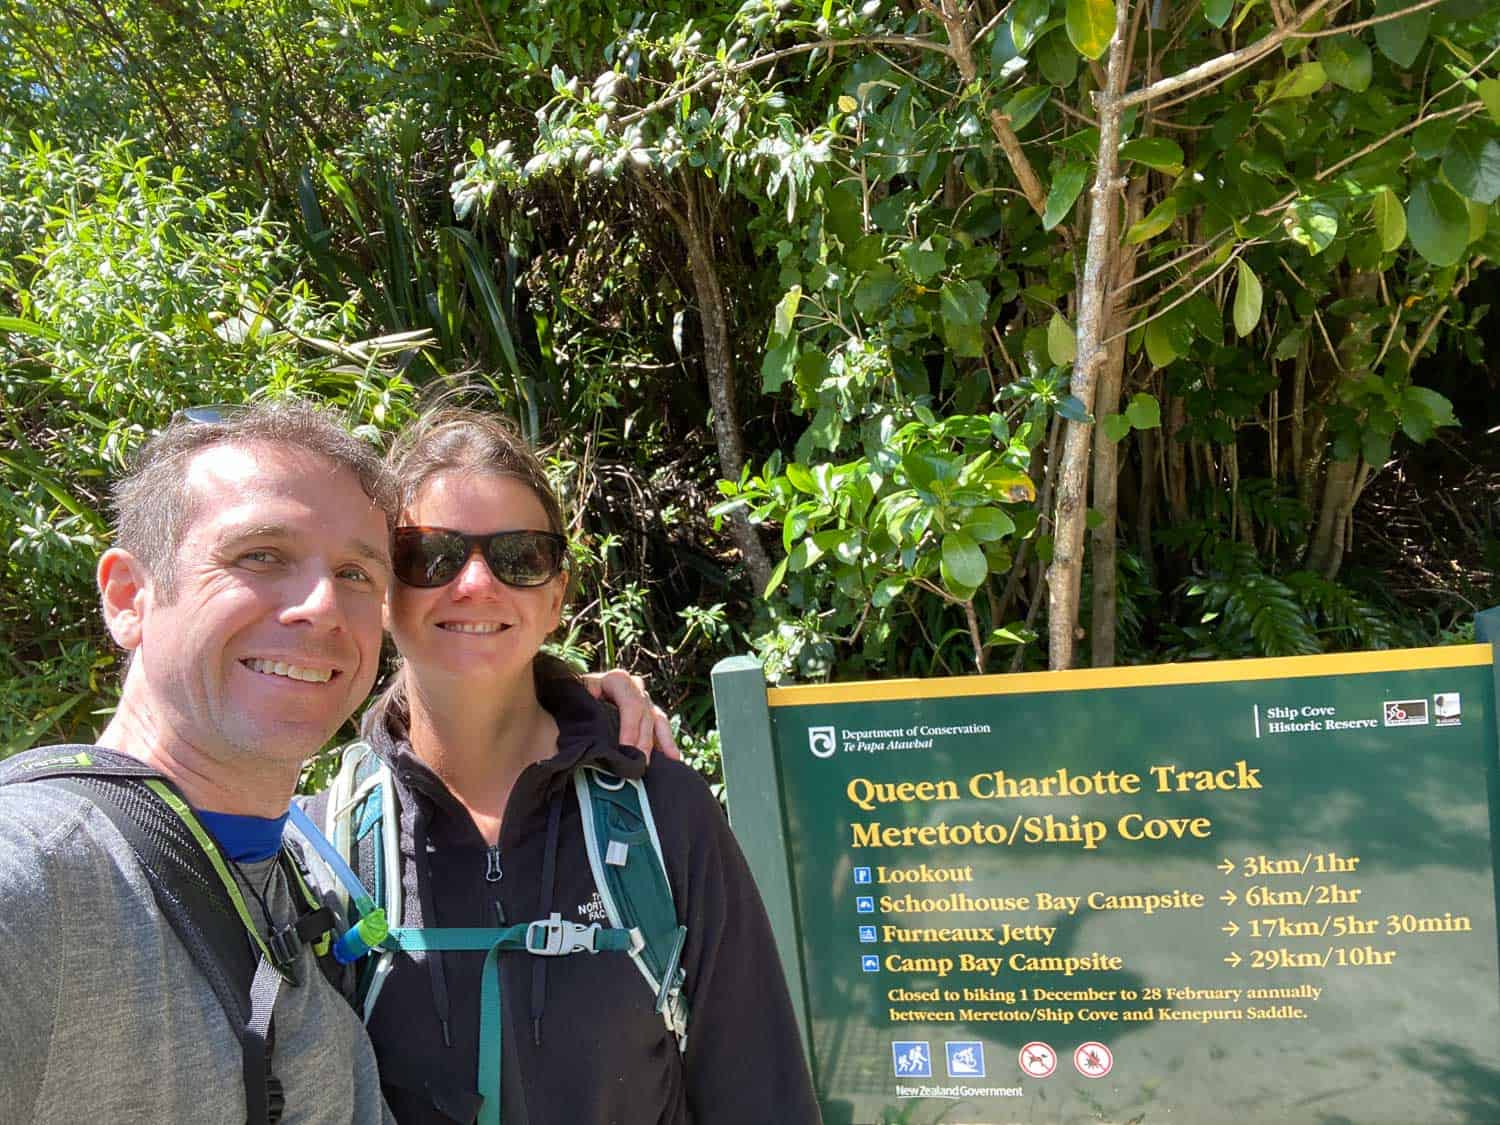 Simon and Erin at the start of the Queen Charlotte Track in Ship Cove